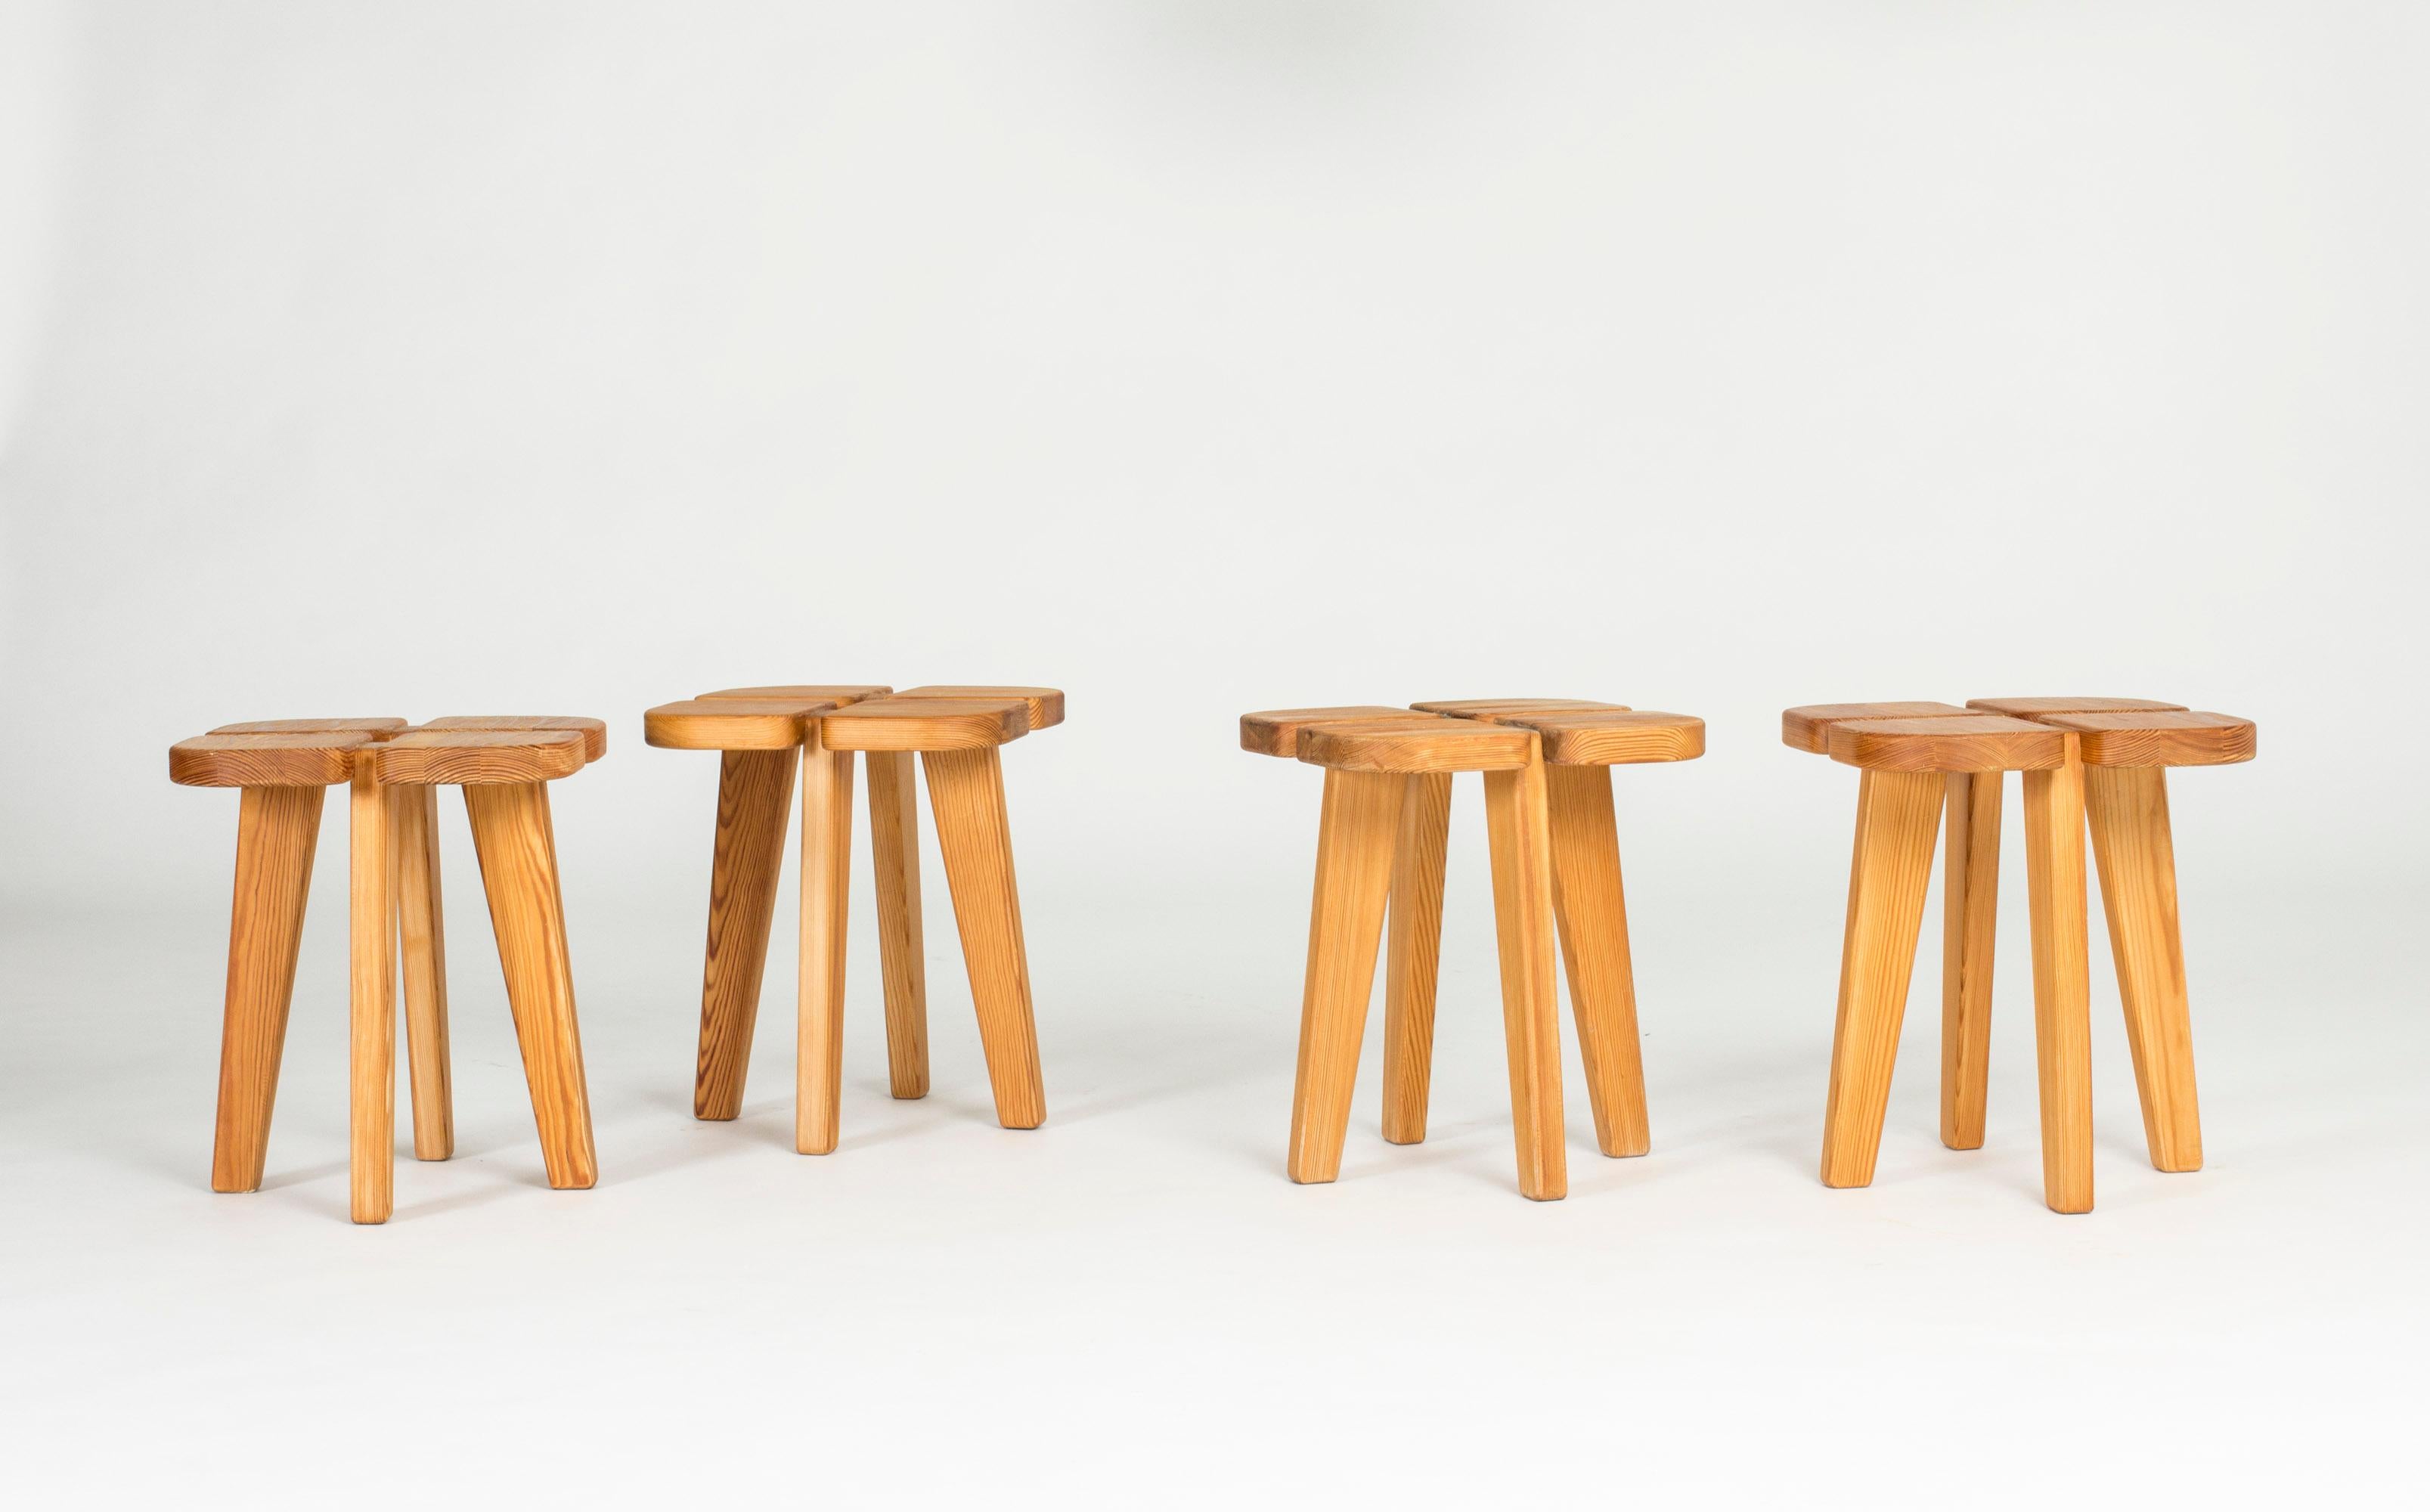 Set of four “Apila” stools by Lisa Johansson-Pape, made from pine with lively woodgrain that varies from stool to stool. “Avila” means clover, so these are four lucky seats.